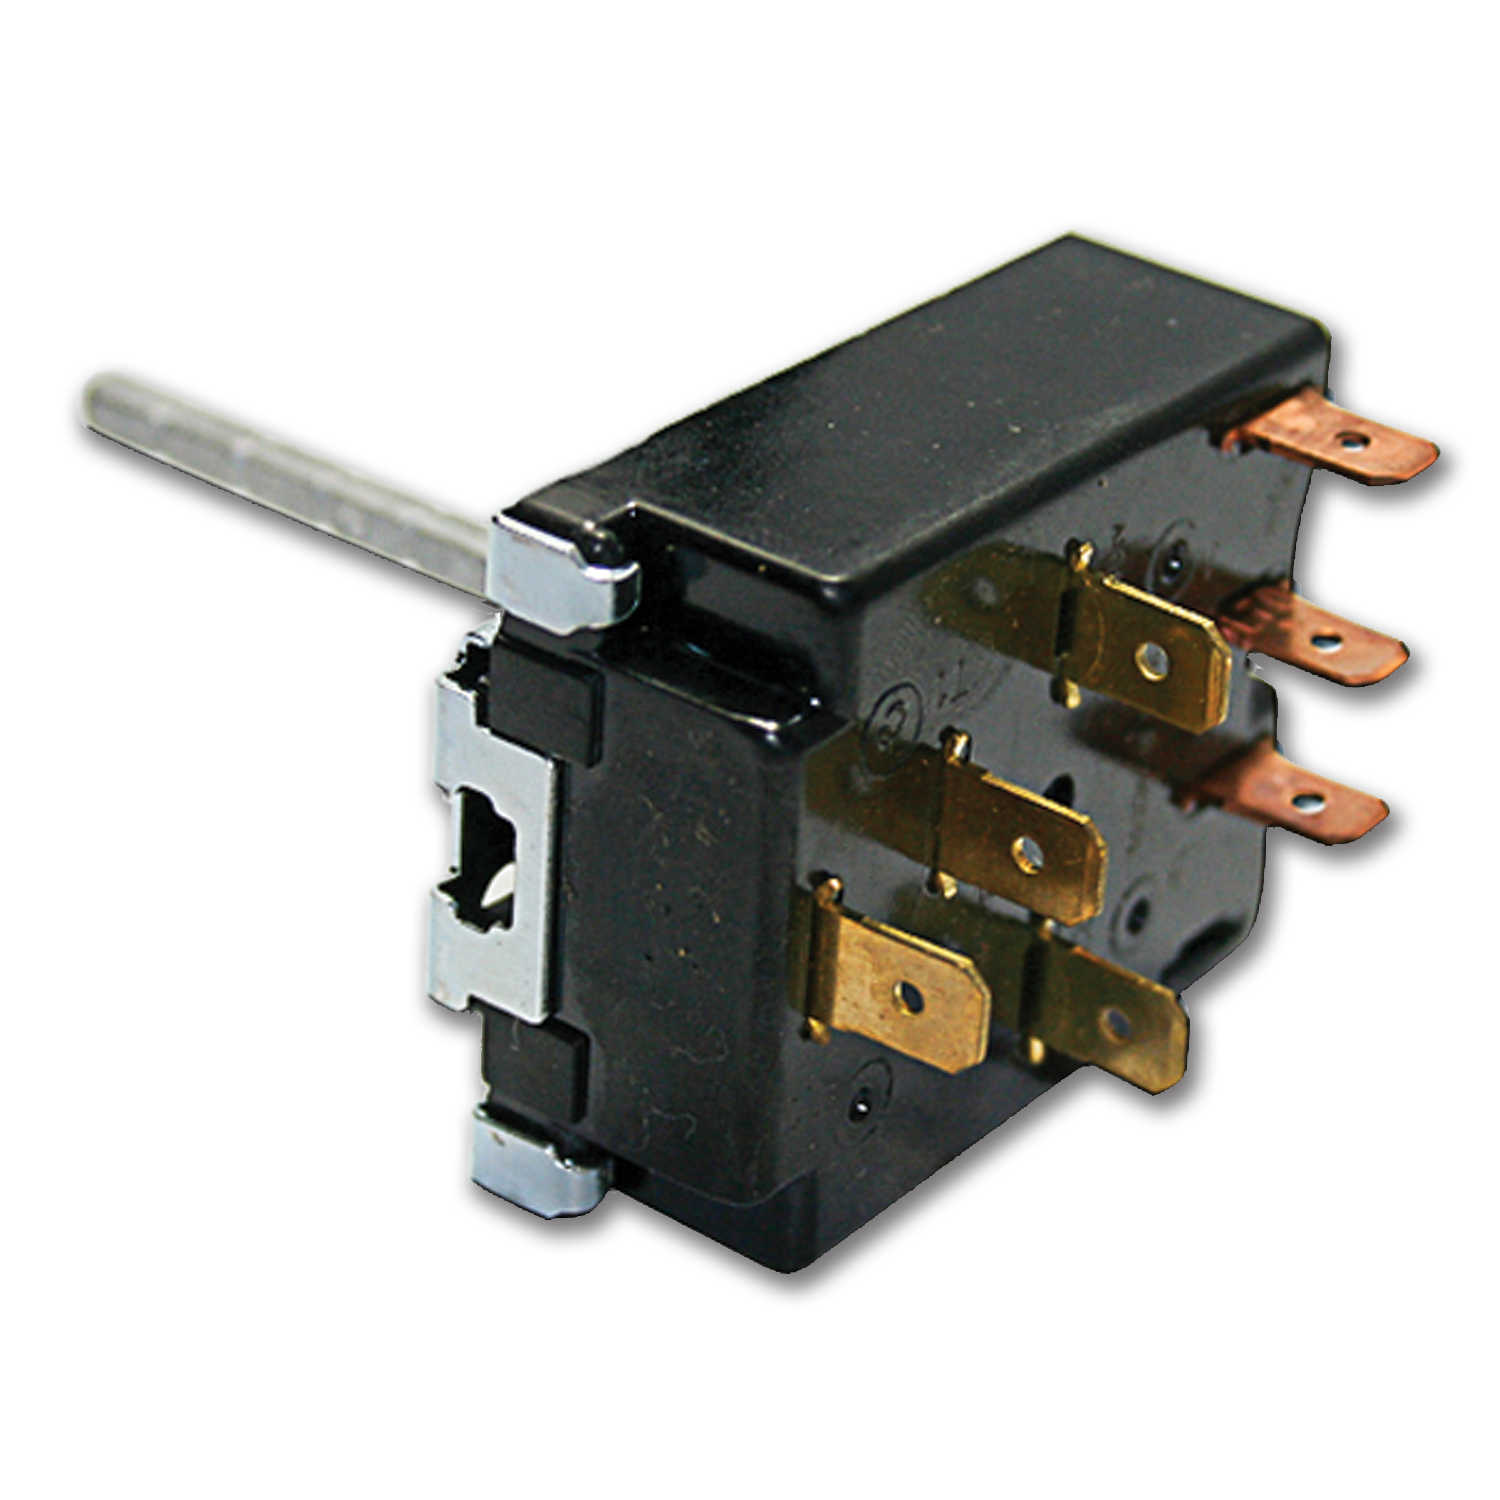 GE Range Oven Selector Switch WB22X5122 Jbp260f2ad for sale online 